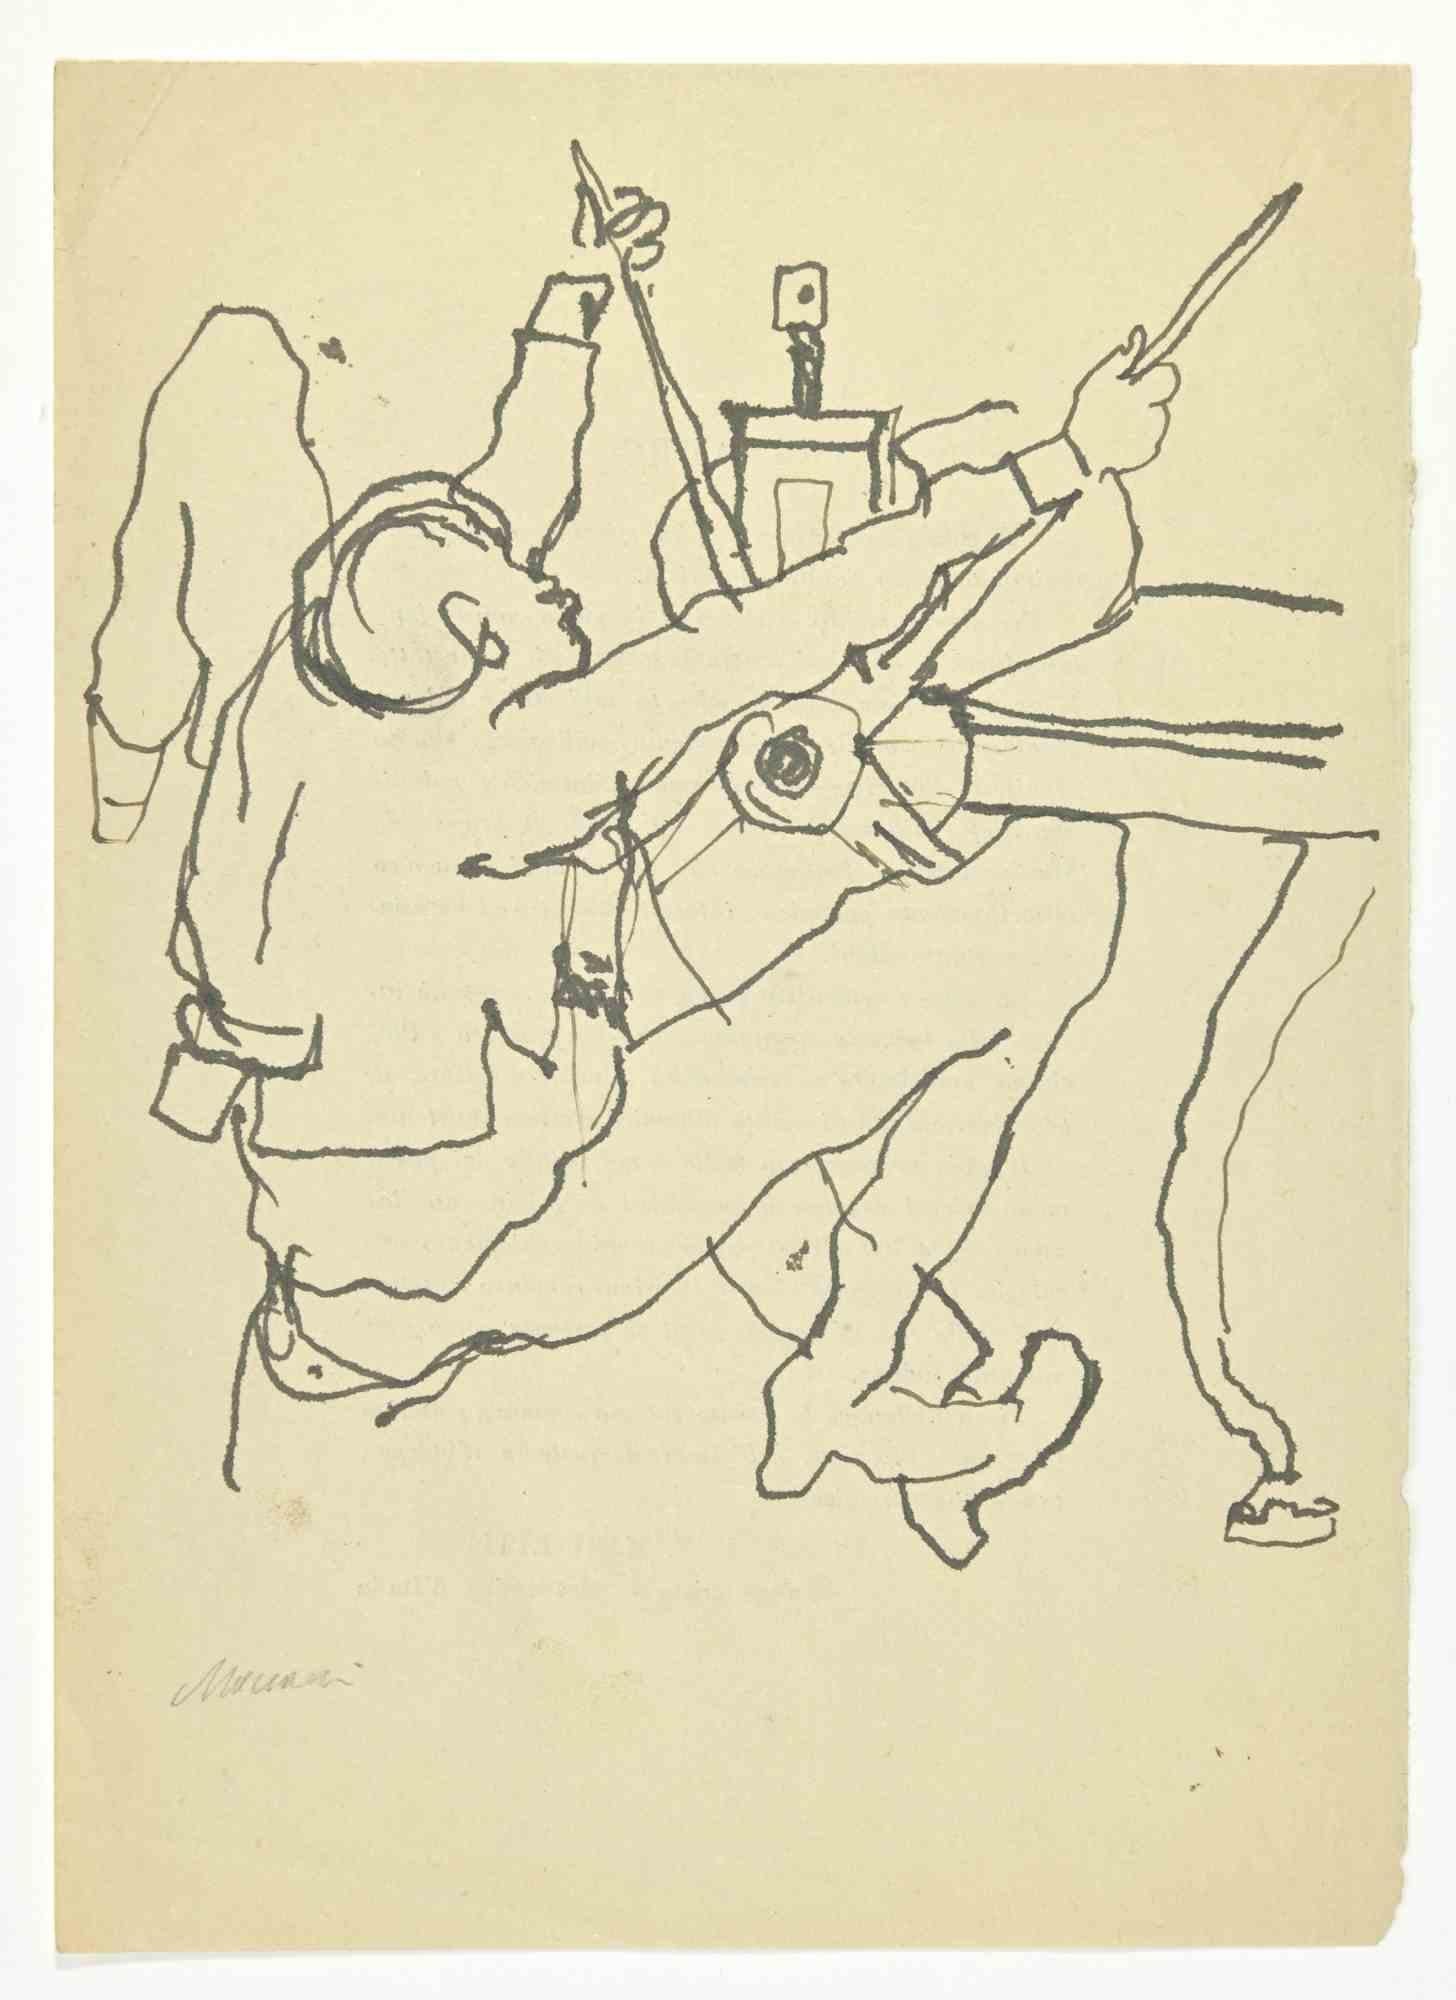 The Figure is a China ink Drawing realized by Mino Maccari  (1924-1989) in the 1950s.

Hand-signed on the lower.

Good conditions.

Mino Maccari (Siena, 1924-Rome, June 16, 1989) was an Italian writer, painter, engraver and journalist, winner of the